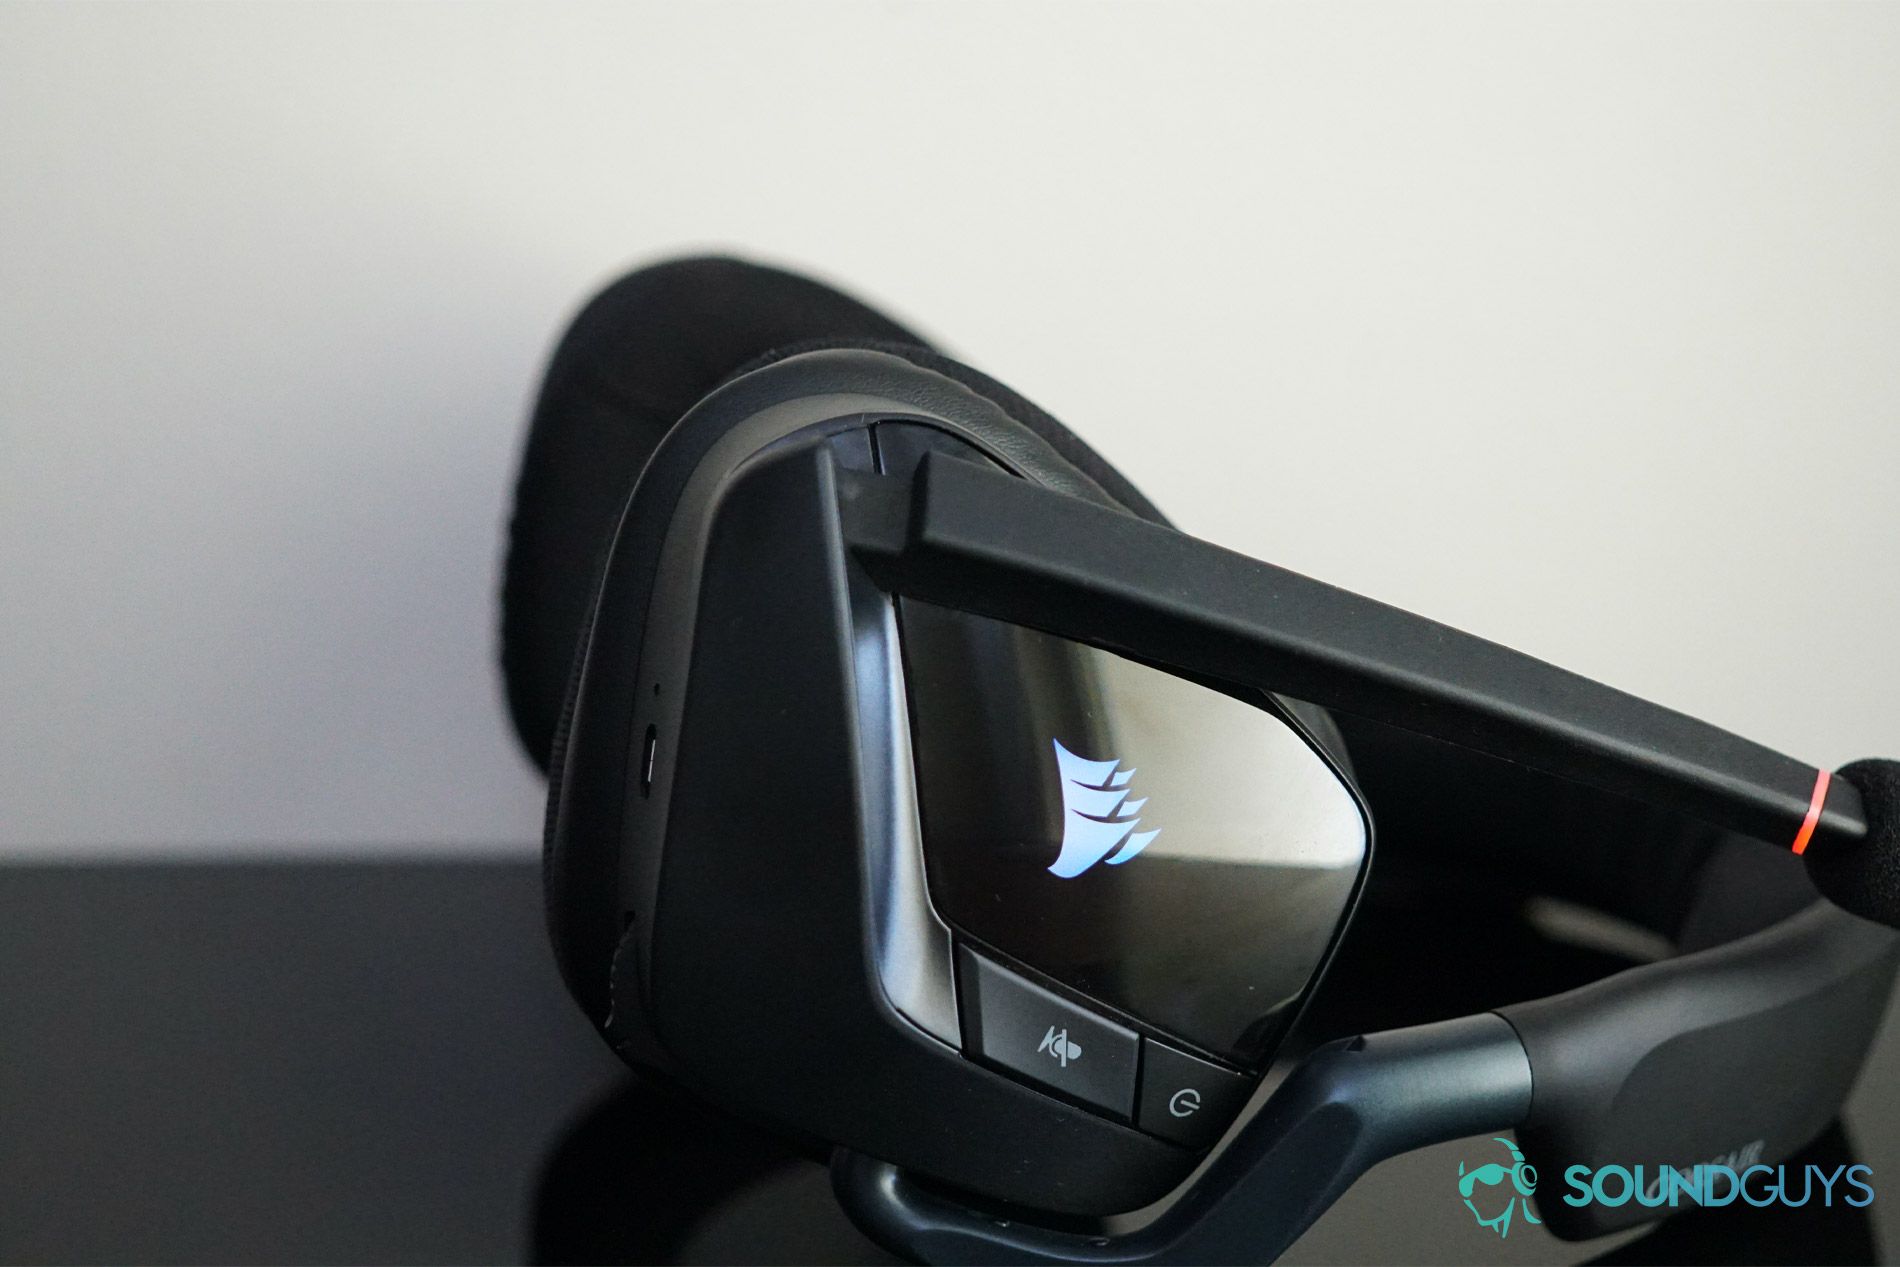 The Corsair Void RGB Elite Wireless gaming headset lies on its side, with its in ear controls visible and its RGB lights on.